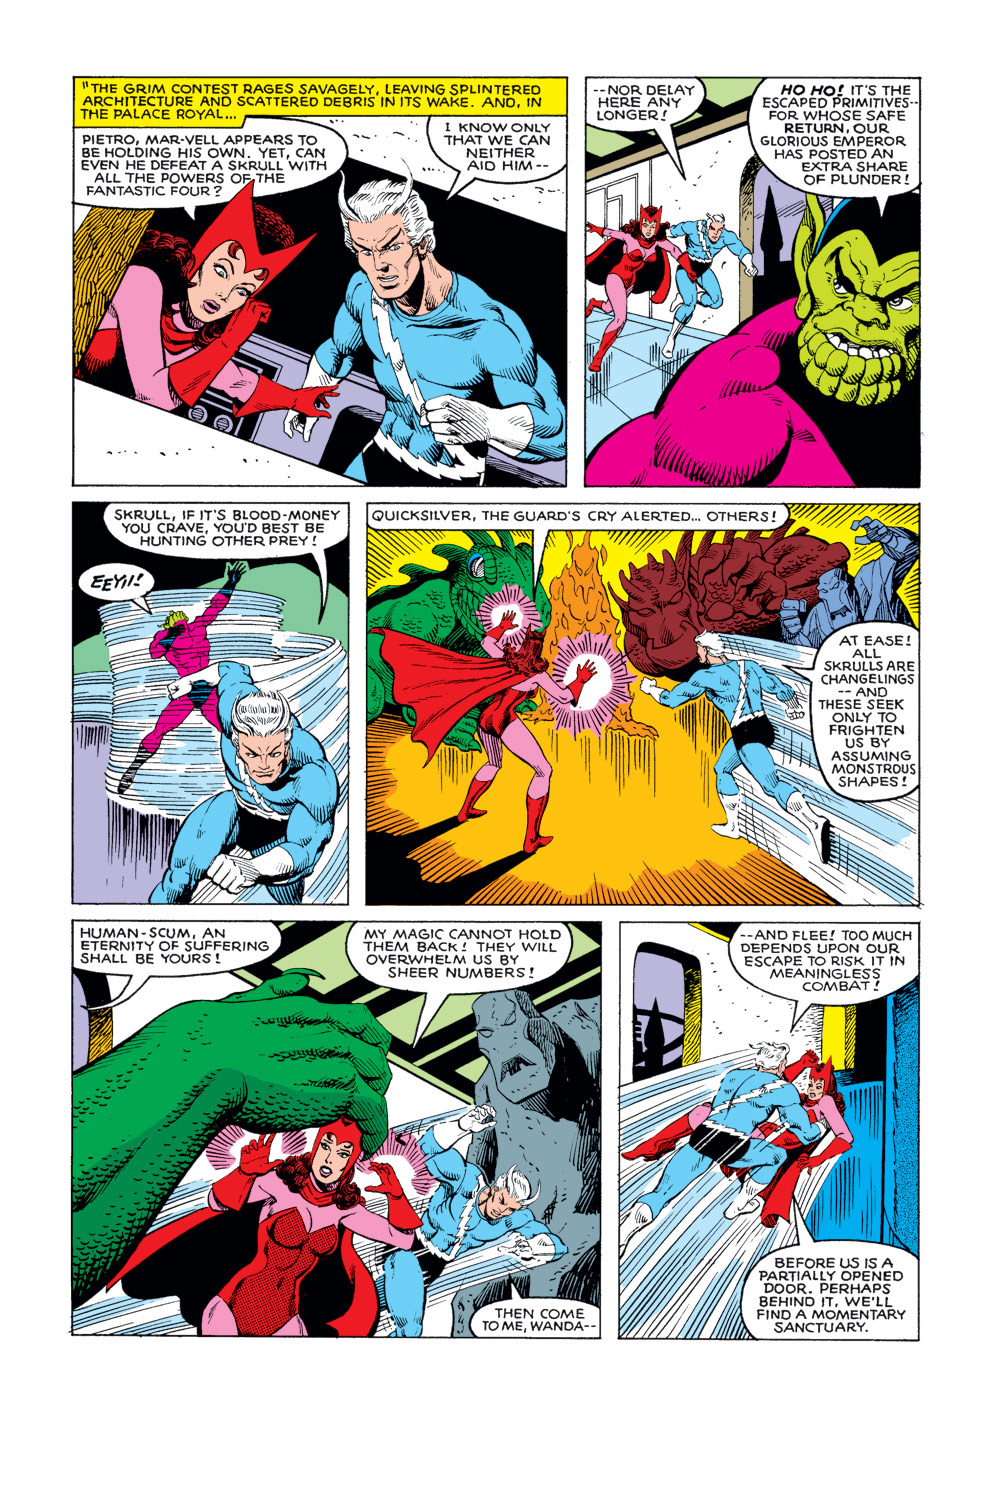 What If? (1977) issue 20 - The Avengers fought the Kree-Skrull war without Rick Jones - Page 23